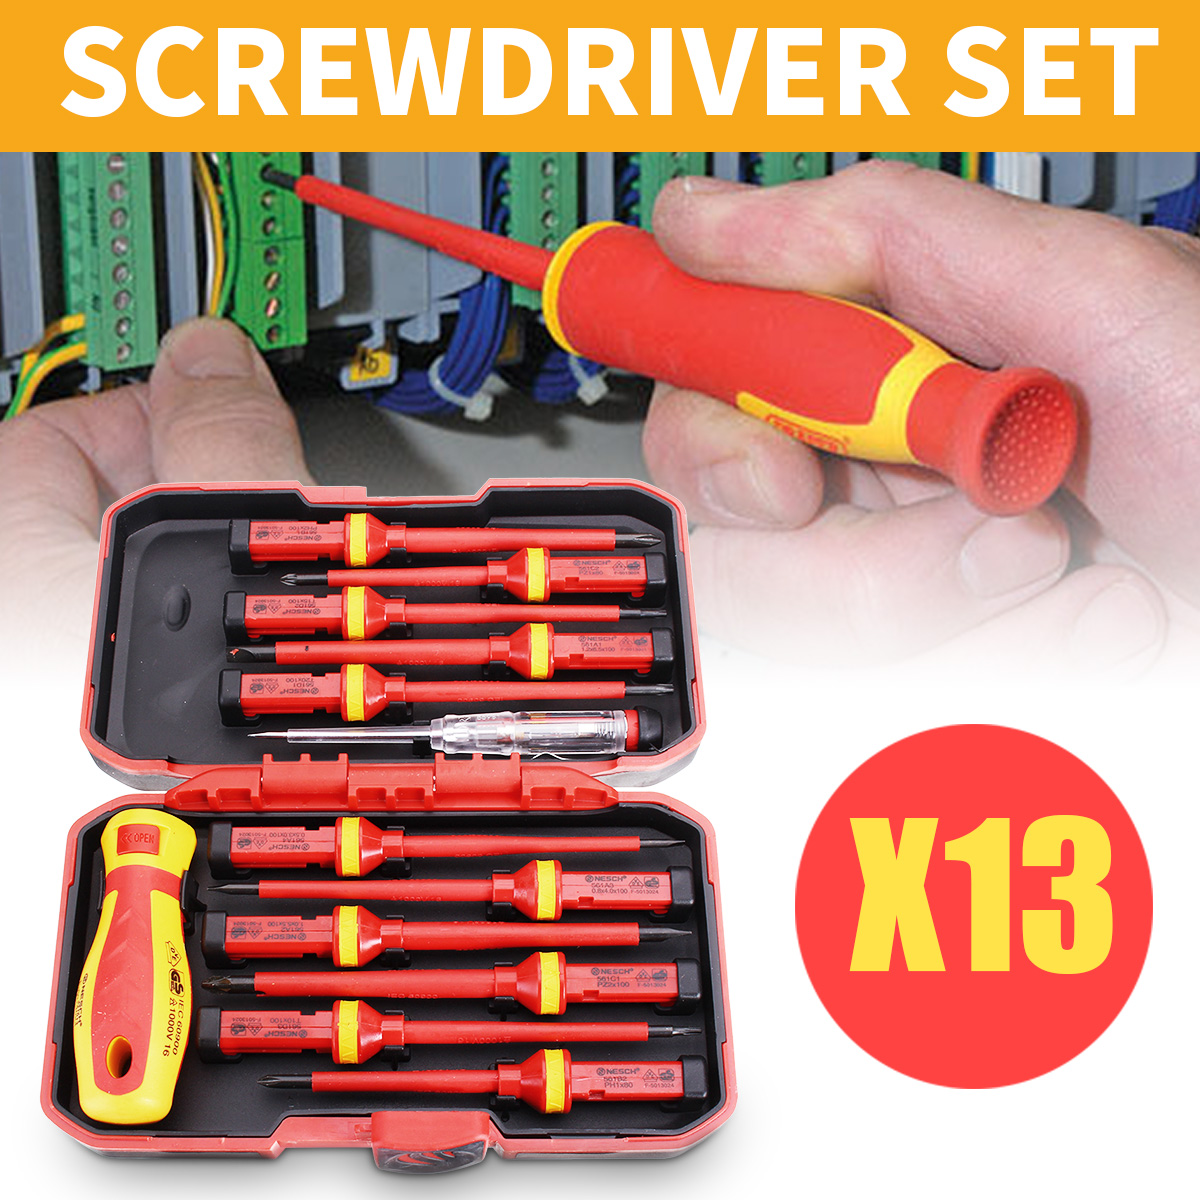 13Pcs 1000V Electronic Insulated Screwdriver Set Phillips Slotted Torx CR-V Screwdriver Repair Tools 12